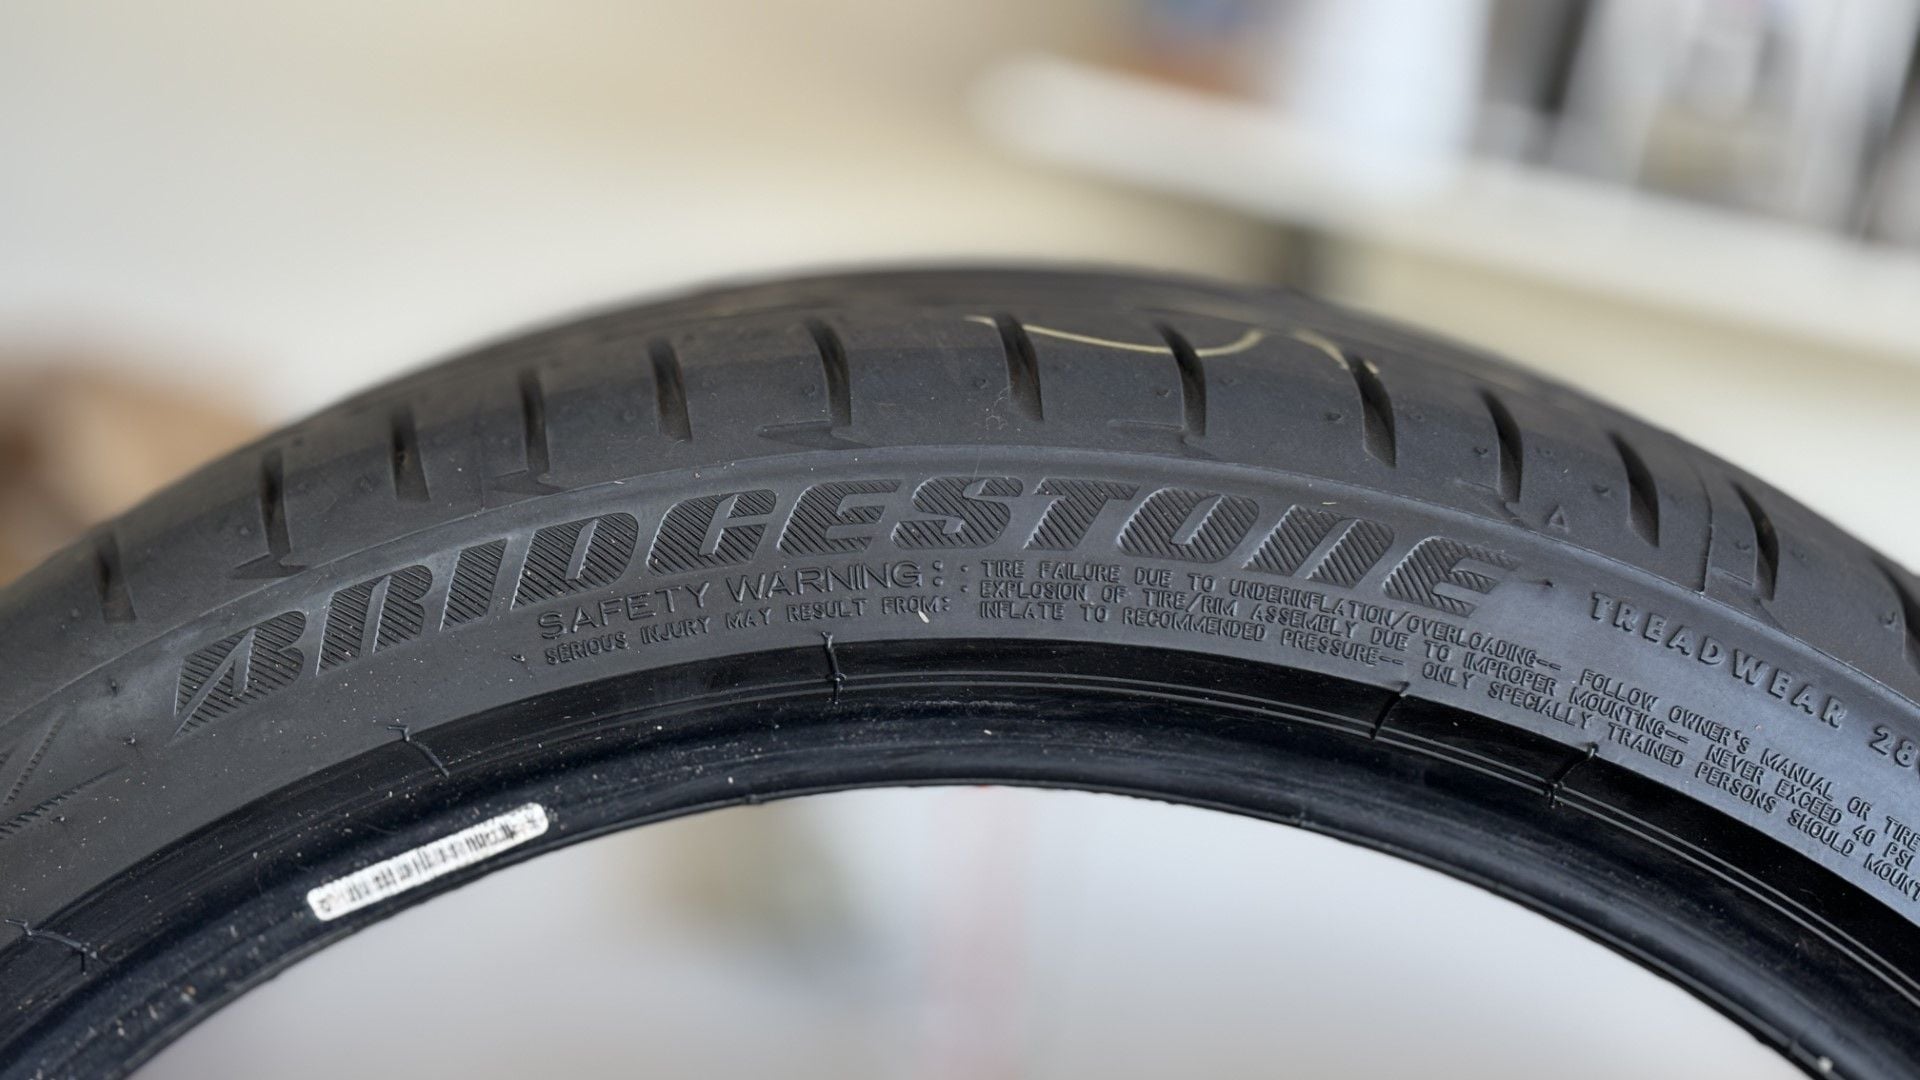 Wheels and Tires/Axles - Bridegston S001 Extended Mobility Tires - New - -1 to 2024  All Models - Jensen Beach, FL 34957, United States